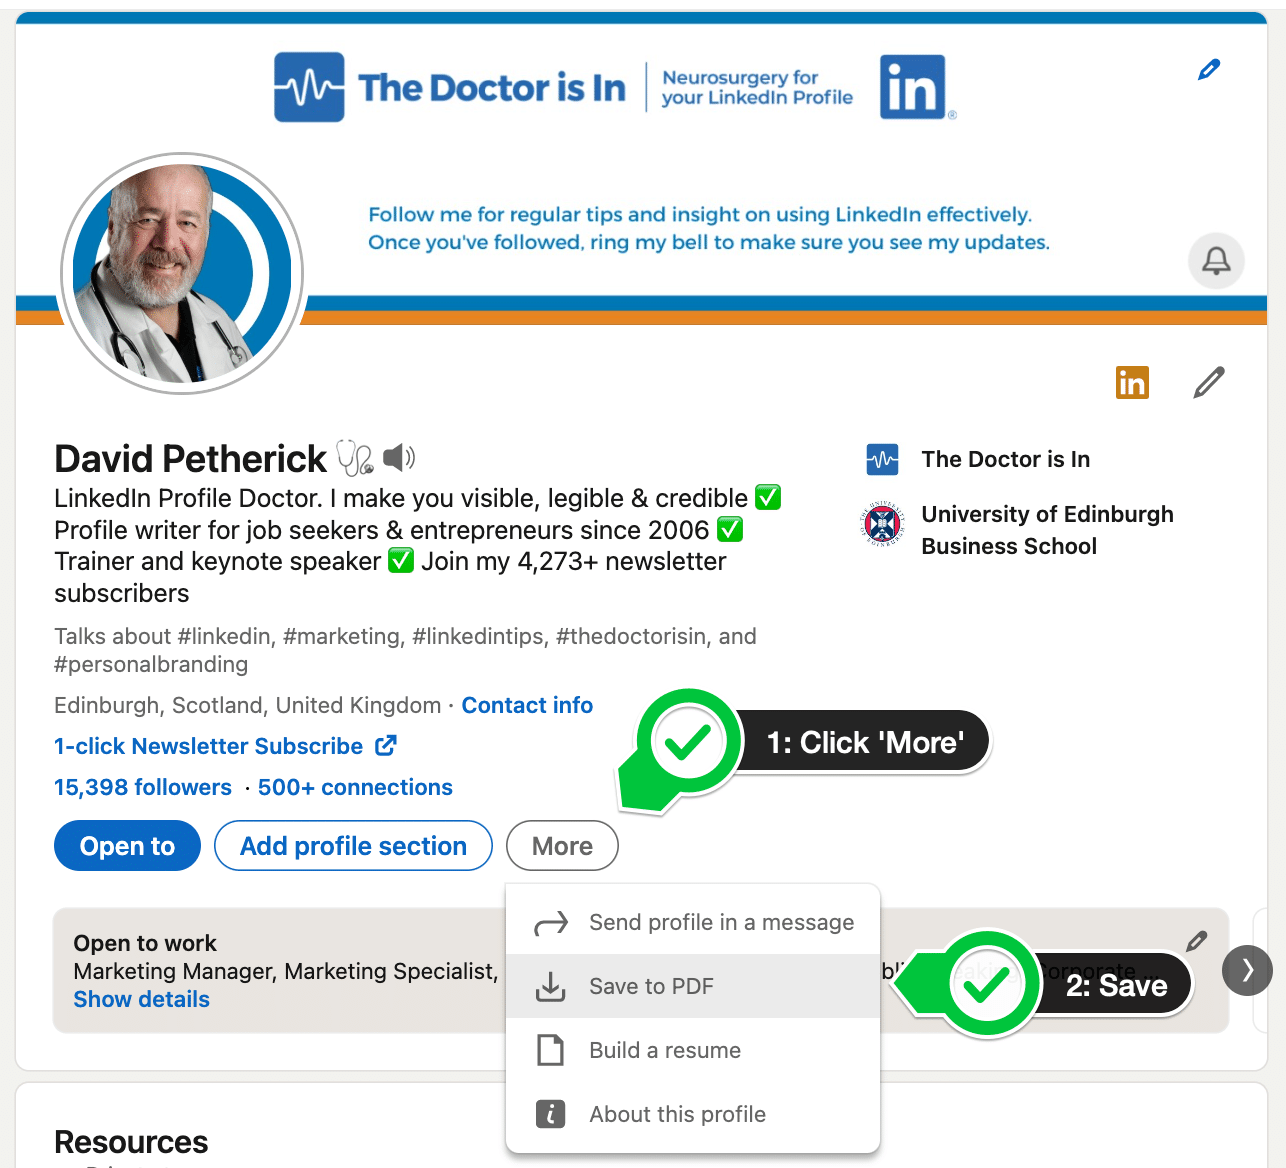 How to save your LinkedIn Profile as a PDF